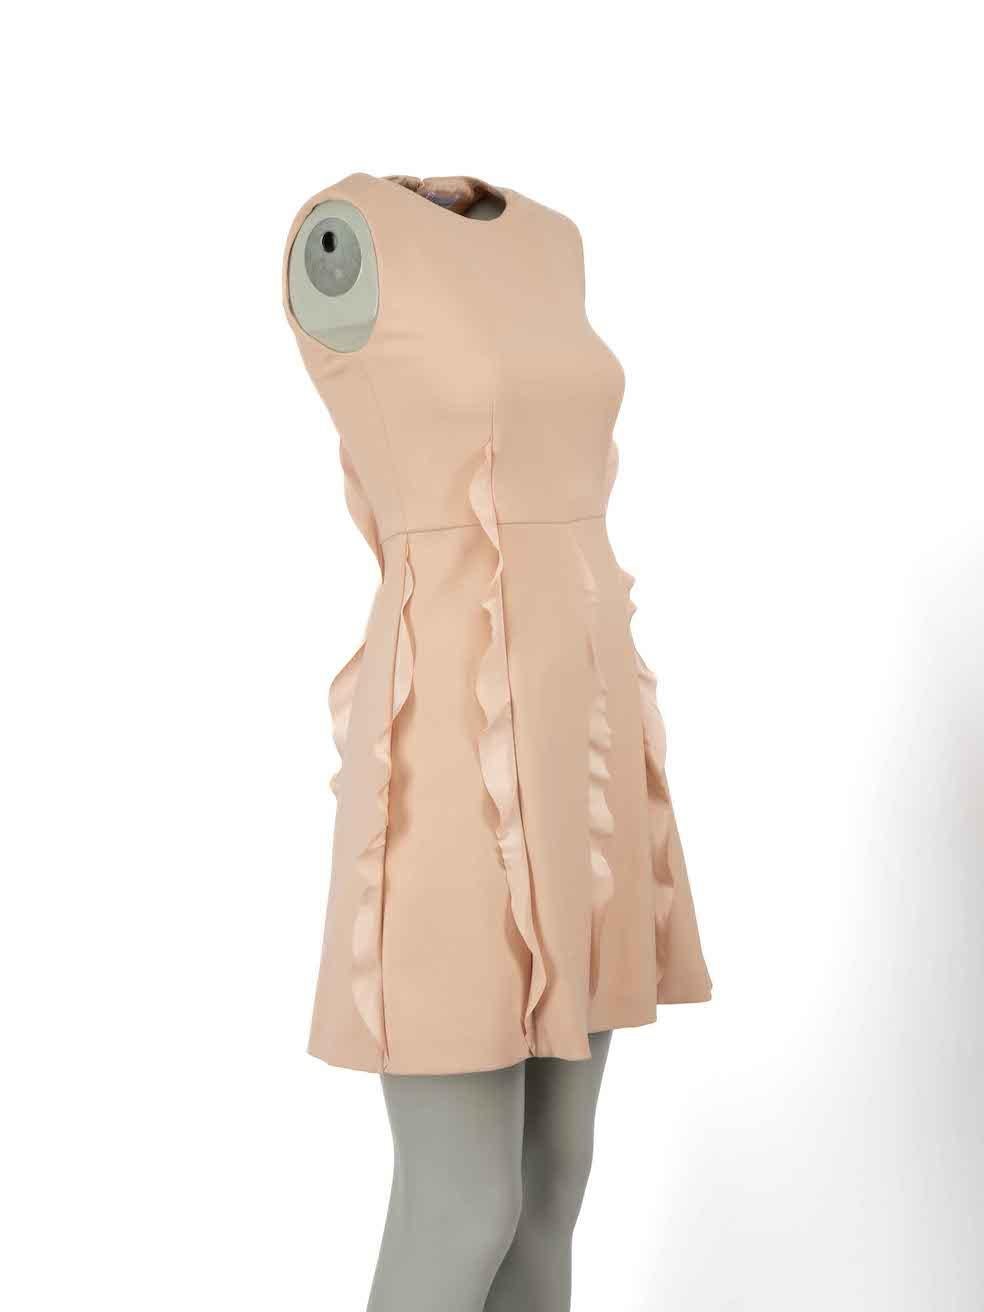 CONDITION is Very good. Minimal wear to dress is evident. Minimal discoloured marks to back of skirt on this used RED Valentino designer resale item.
 
Details
Pink
Viscose
Dress
Round neck
Sleeveless
Mini
Ruffle detail
Back zip fastening

Made in